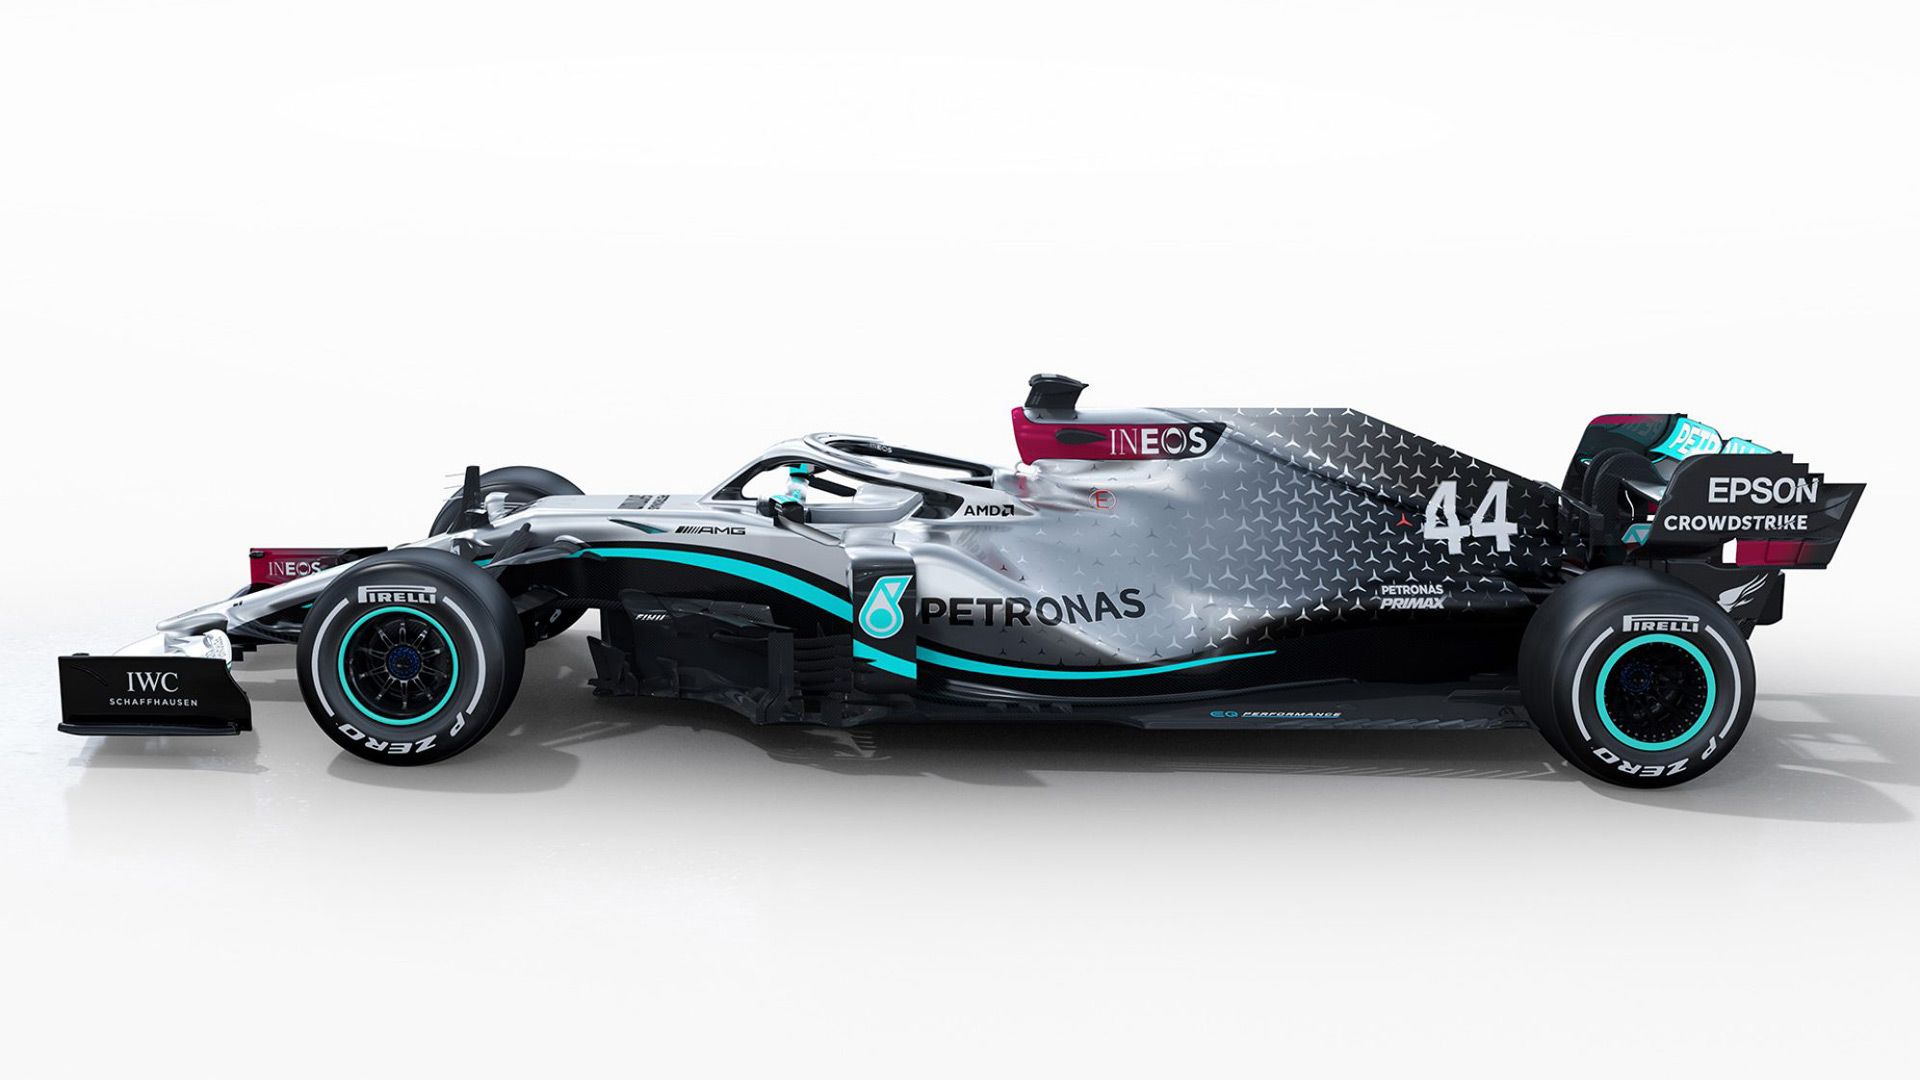 Mercedes AMG Reveals Its Race Car For The 2020 F1 Season